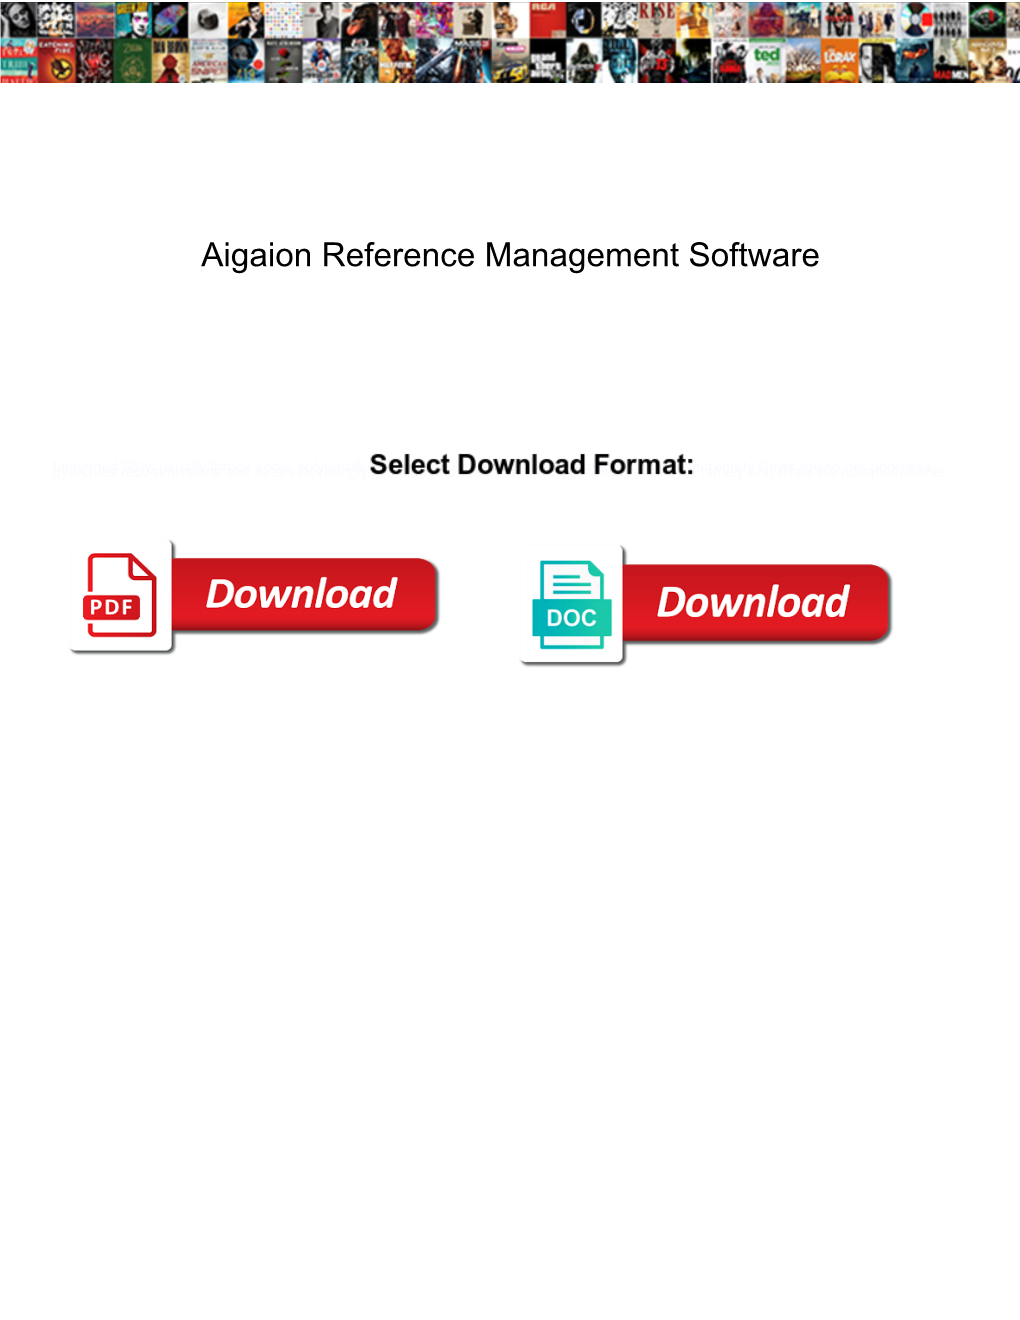 Aigaion Reference Management Software